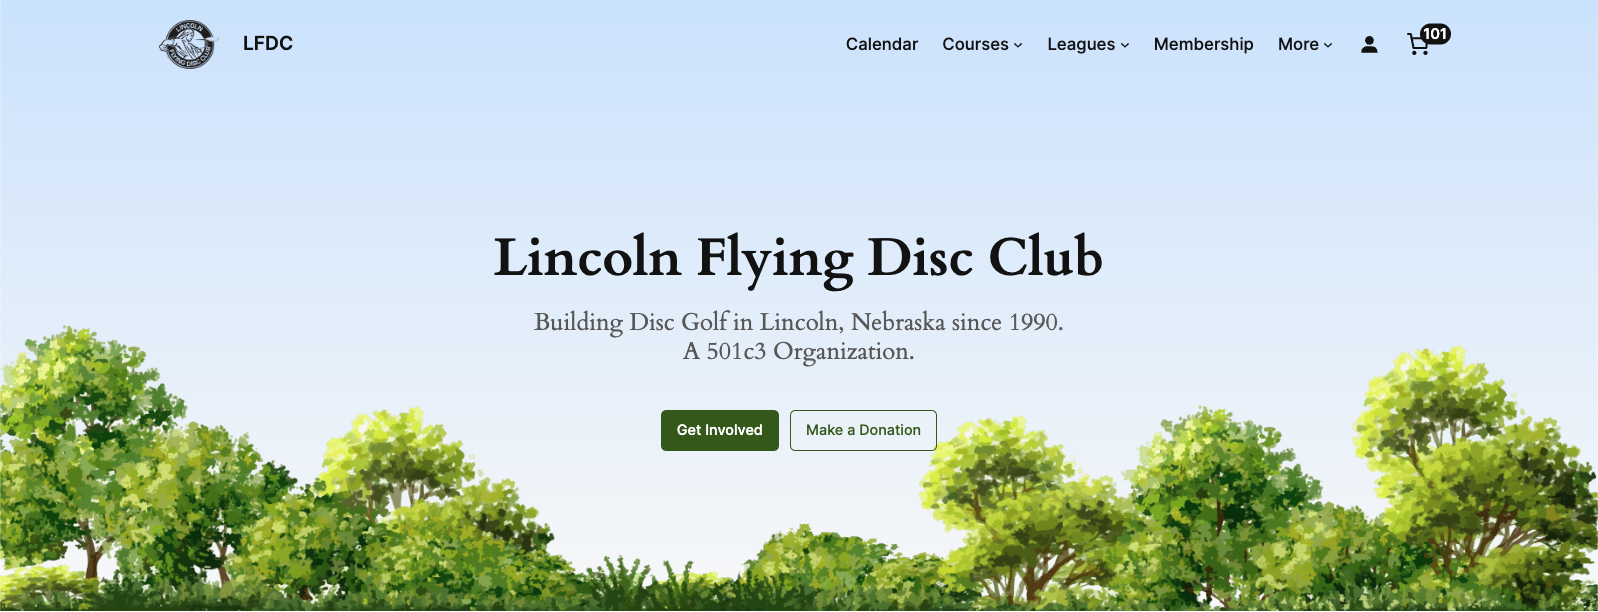 Navigating the LFDC Website Updates: “Club Cash” and More